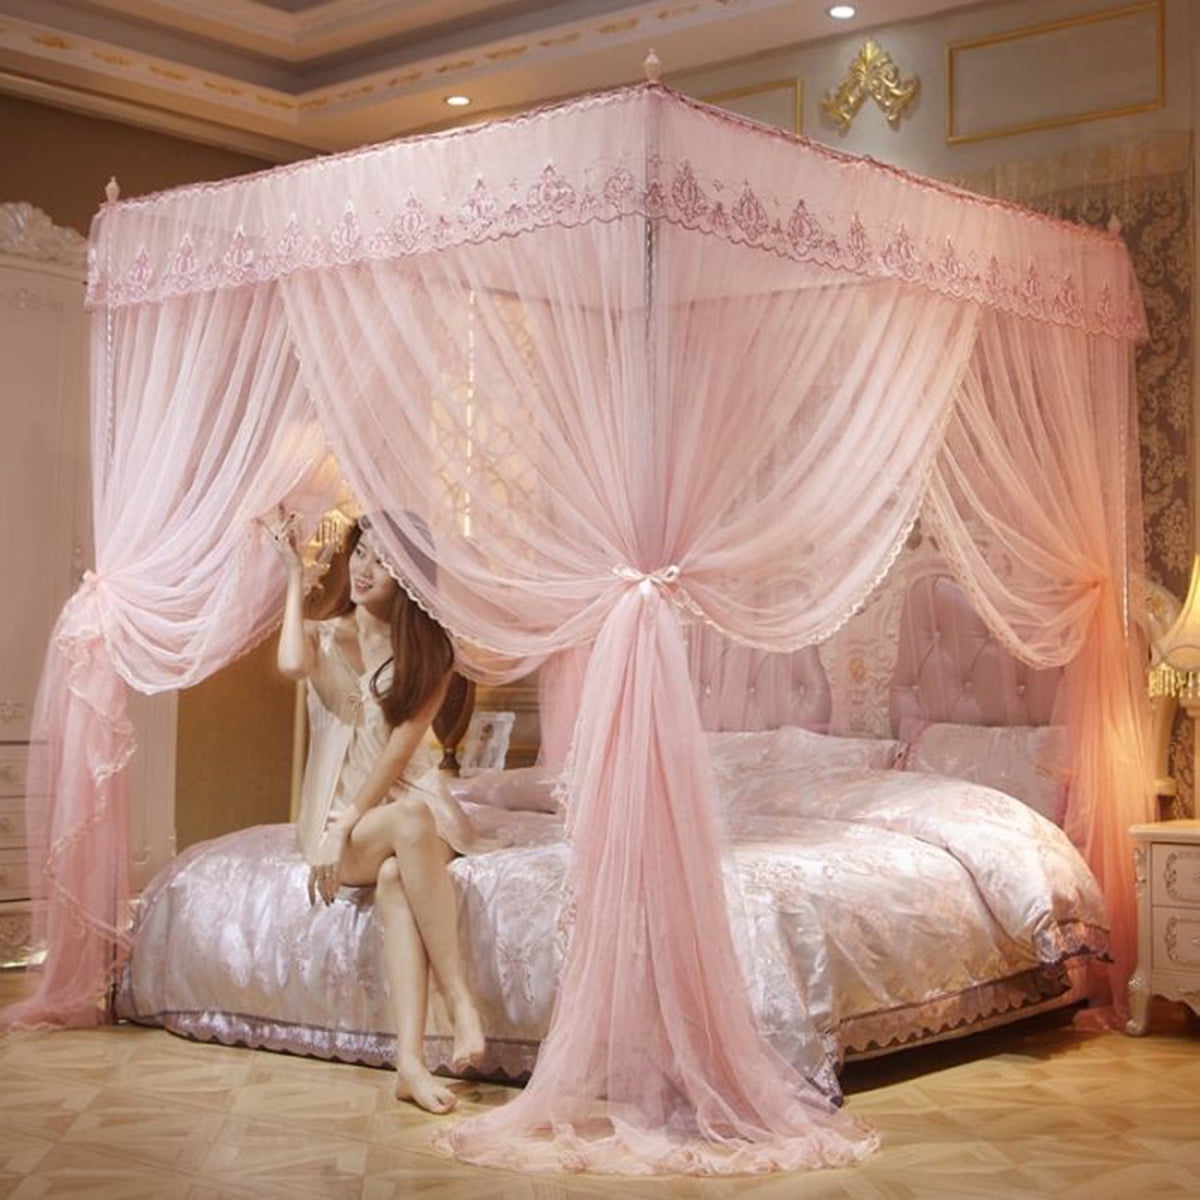 Twin, Pink Ruffle Princess 4 Corner Post Mosquito Net Bed Canopy for Girls Kids Toddlers Crib Bedroom Décor JQWUPUP Bed Curtains Canopy 